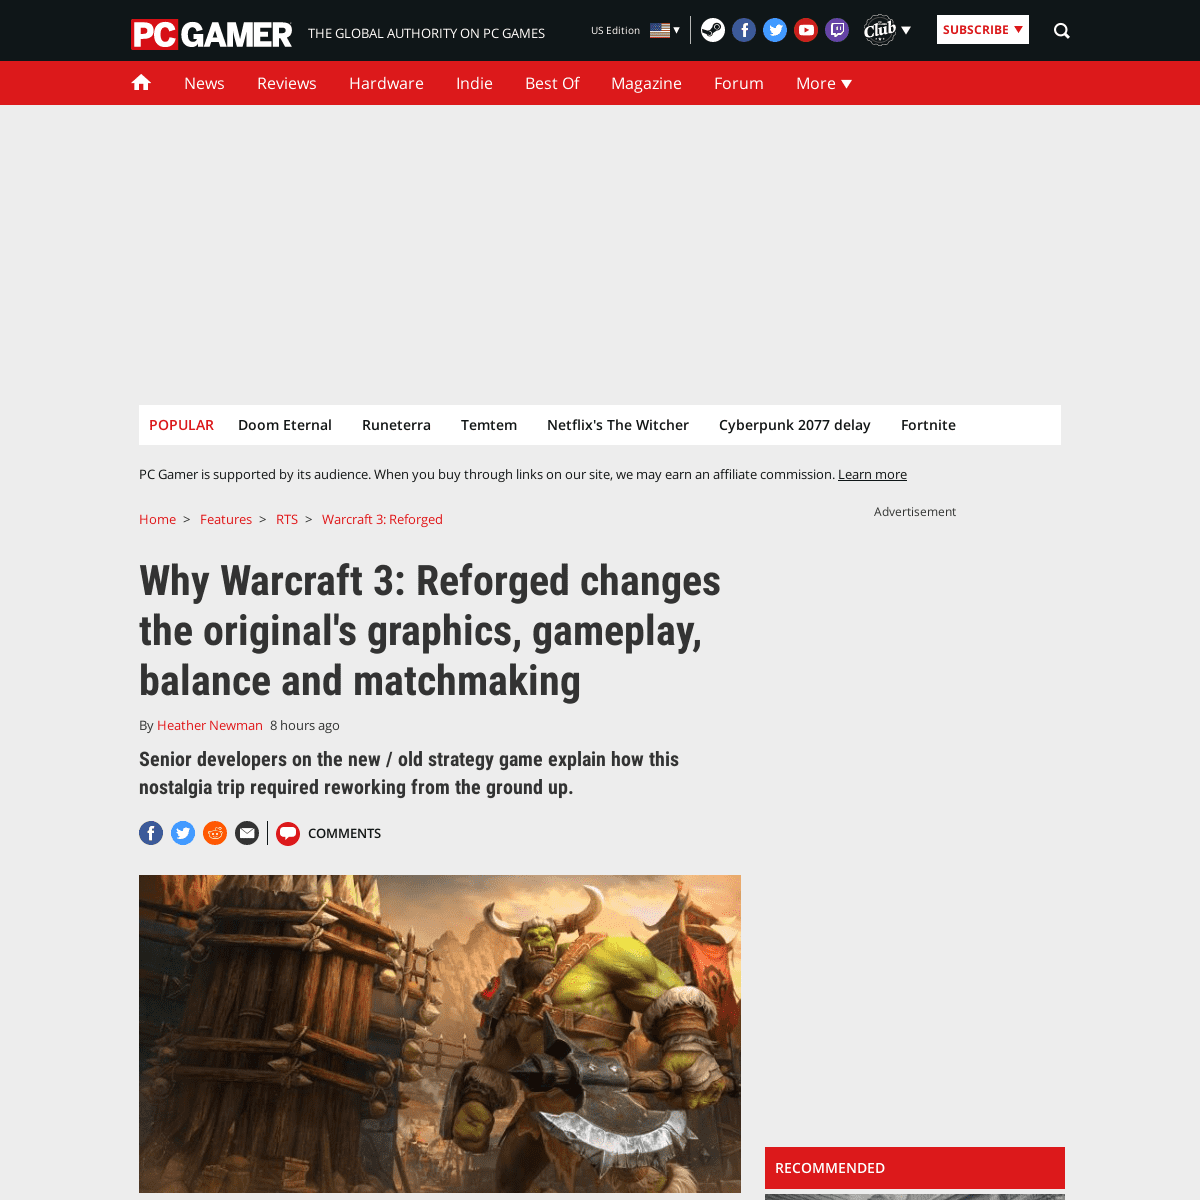 A complete backup of www.pcgamer.com/why-warcraft-3-reforged-changes-the-originals-graphics-gameplay-balance-and-matchmaking/